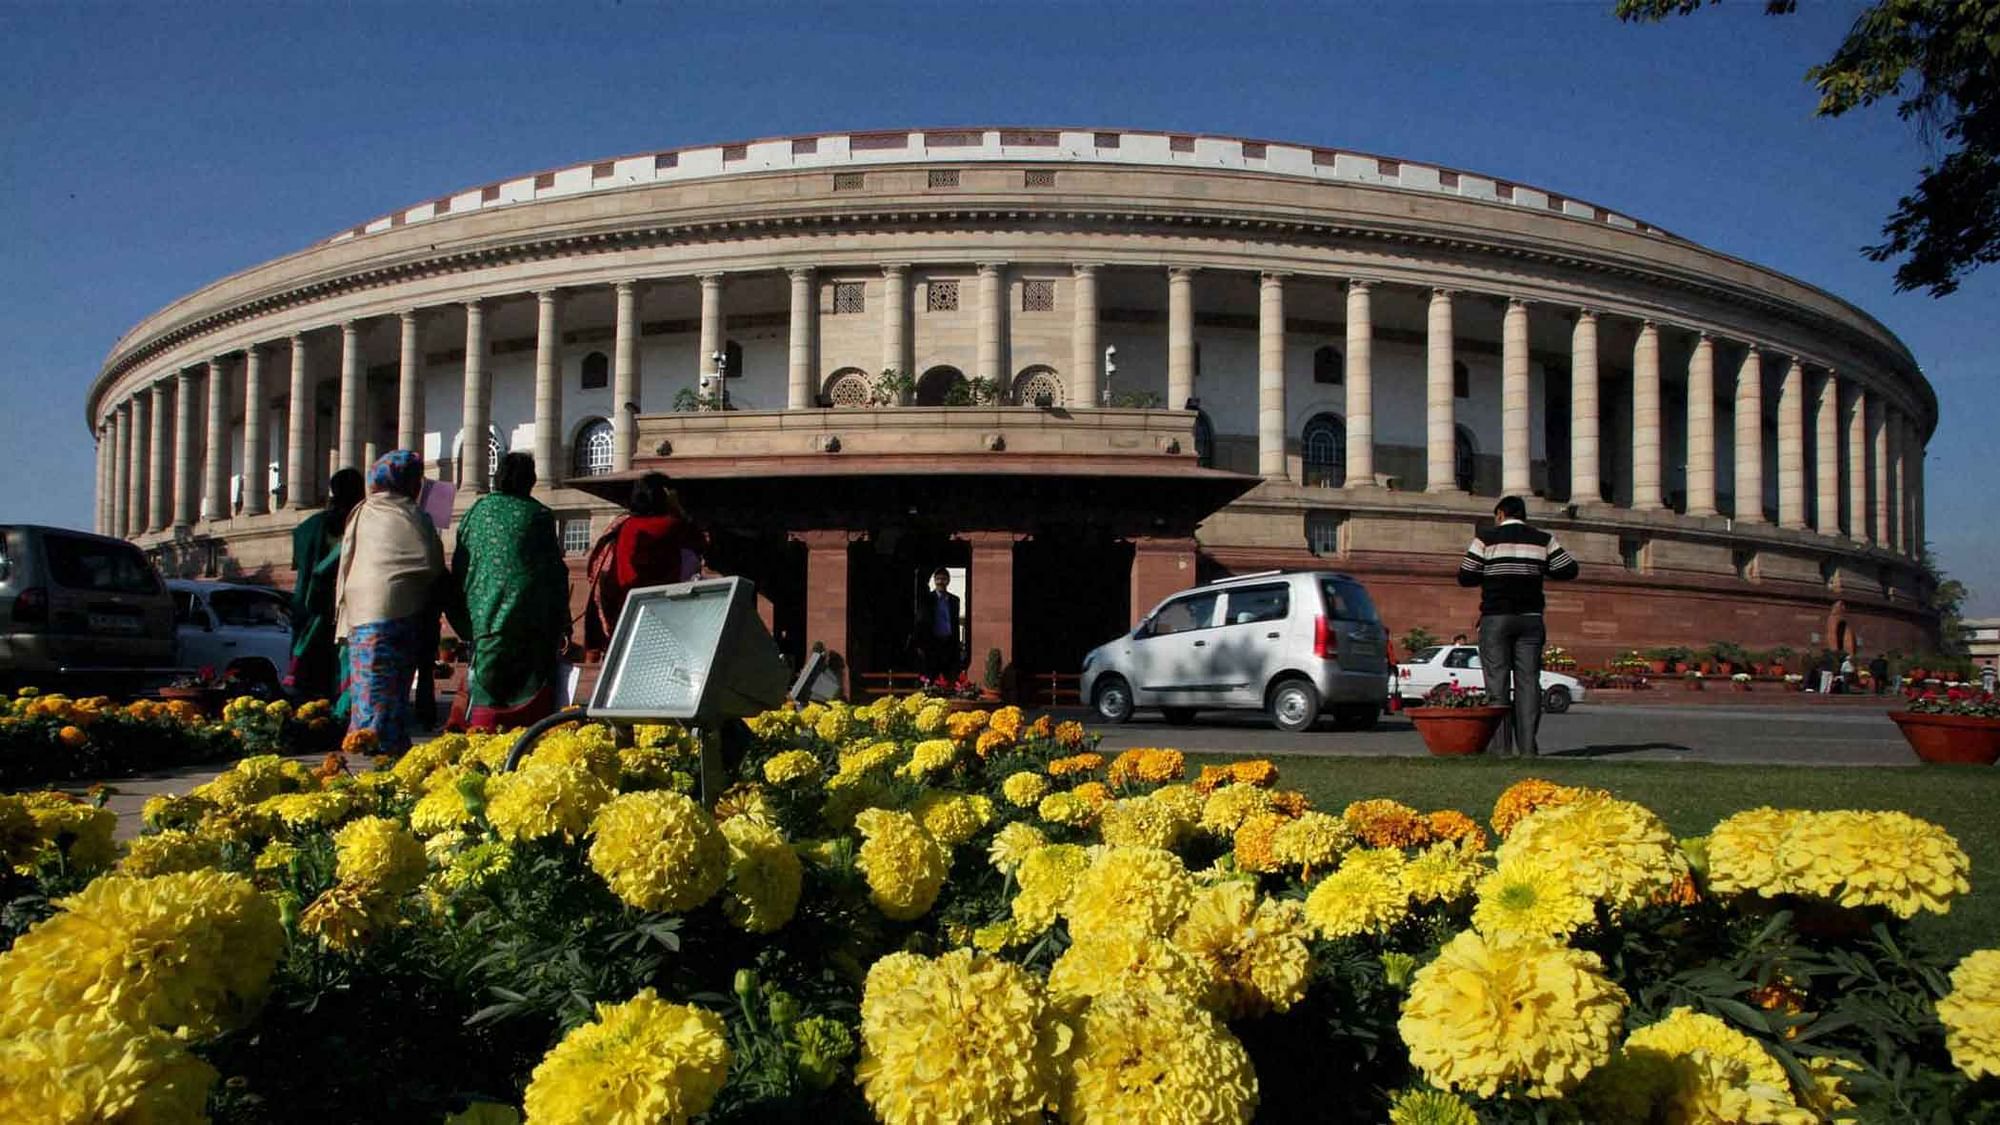 The Monsoon Session 2020 of Parliament is likely to be held  from 14 September to 1 October.